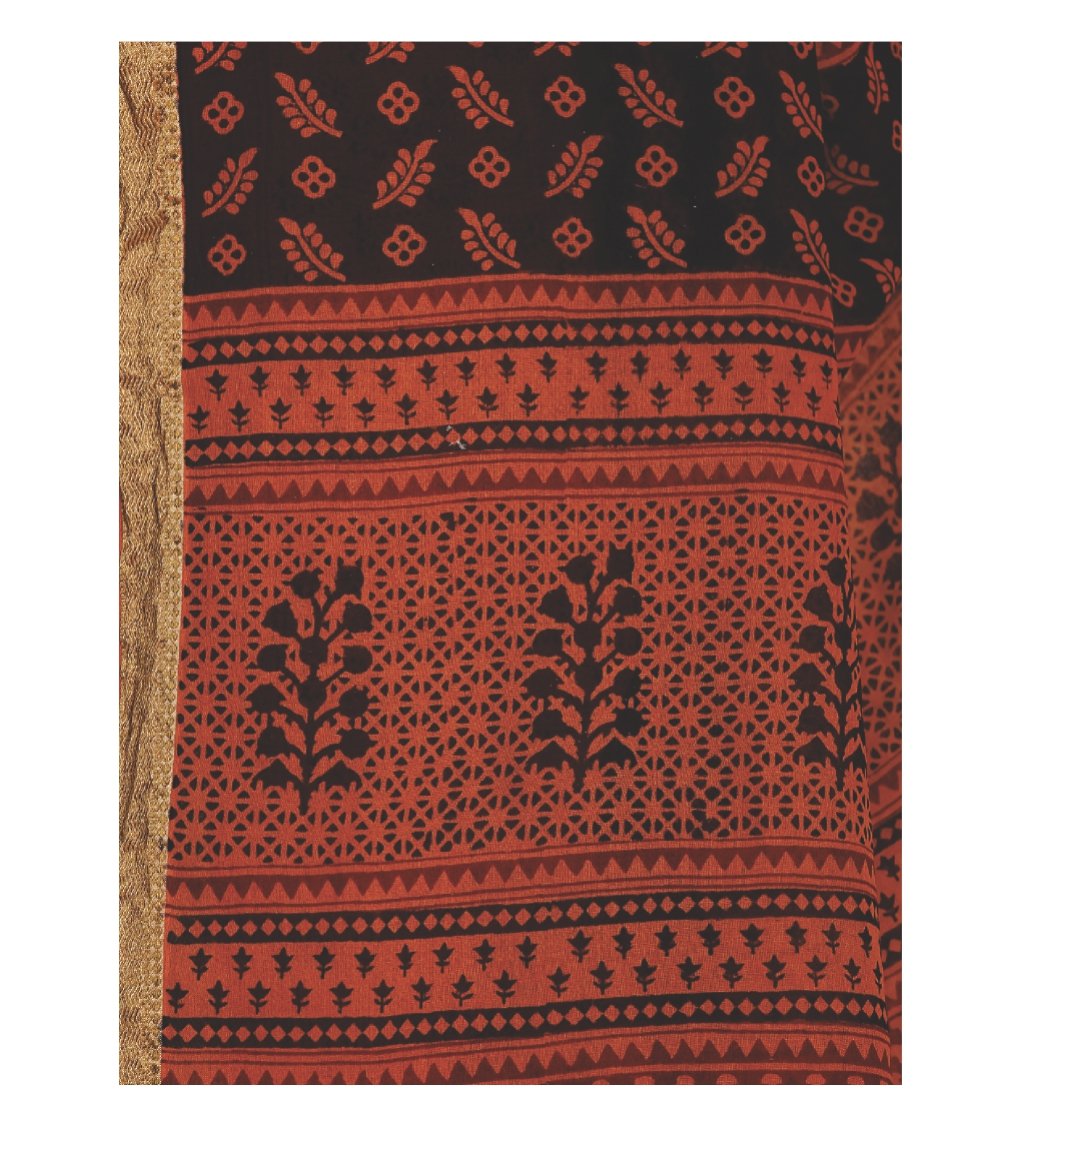 Orange Cotton Hand Block Bagh Print Handcrafted Saree-Saree-Kalakari India-ZIBASA0055-Bagh, Cotton, Geographical Indication, Hand Blocks, Hand Crafted, Heritage Prints, Natural Dyes, Sarees, Sustainable Fabrics-[Linen,Ethnic,wear,Fashionista,Handloom,Handicraft,Indigo,blockprint,block,print,Cotton,Chanderi,Blue, latest,classy,party,bollywood,trendy,summer,style,traditional,formal,elegant,unique,style,hand,block,print, dabu,booti,gift,present,glamorous,affordable,collectible,Sari,Saree,printed, h